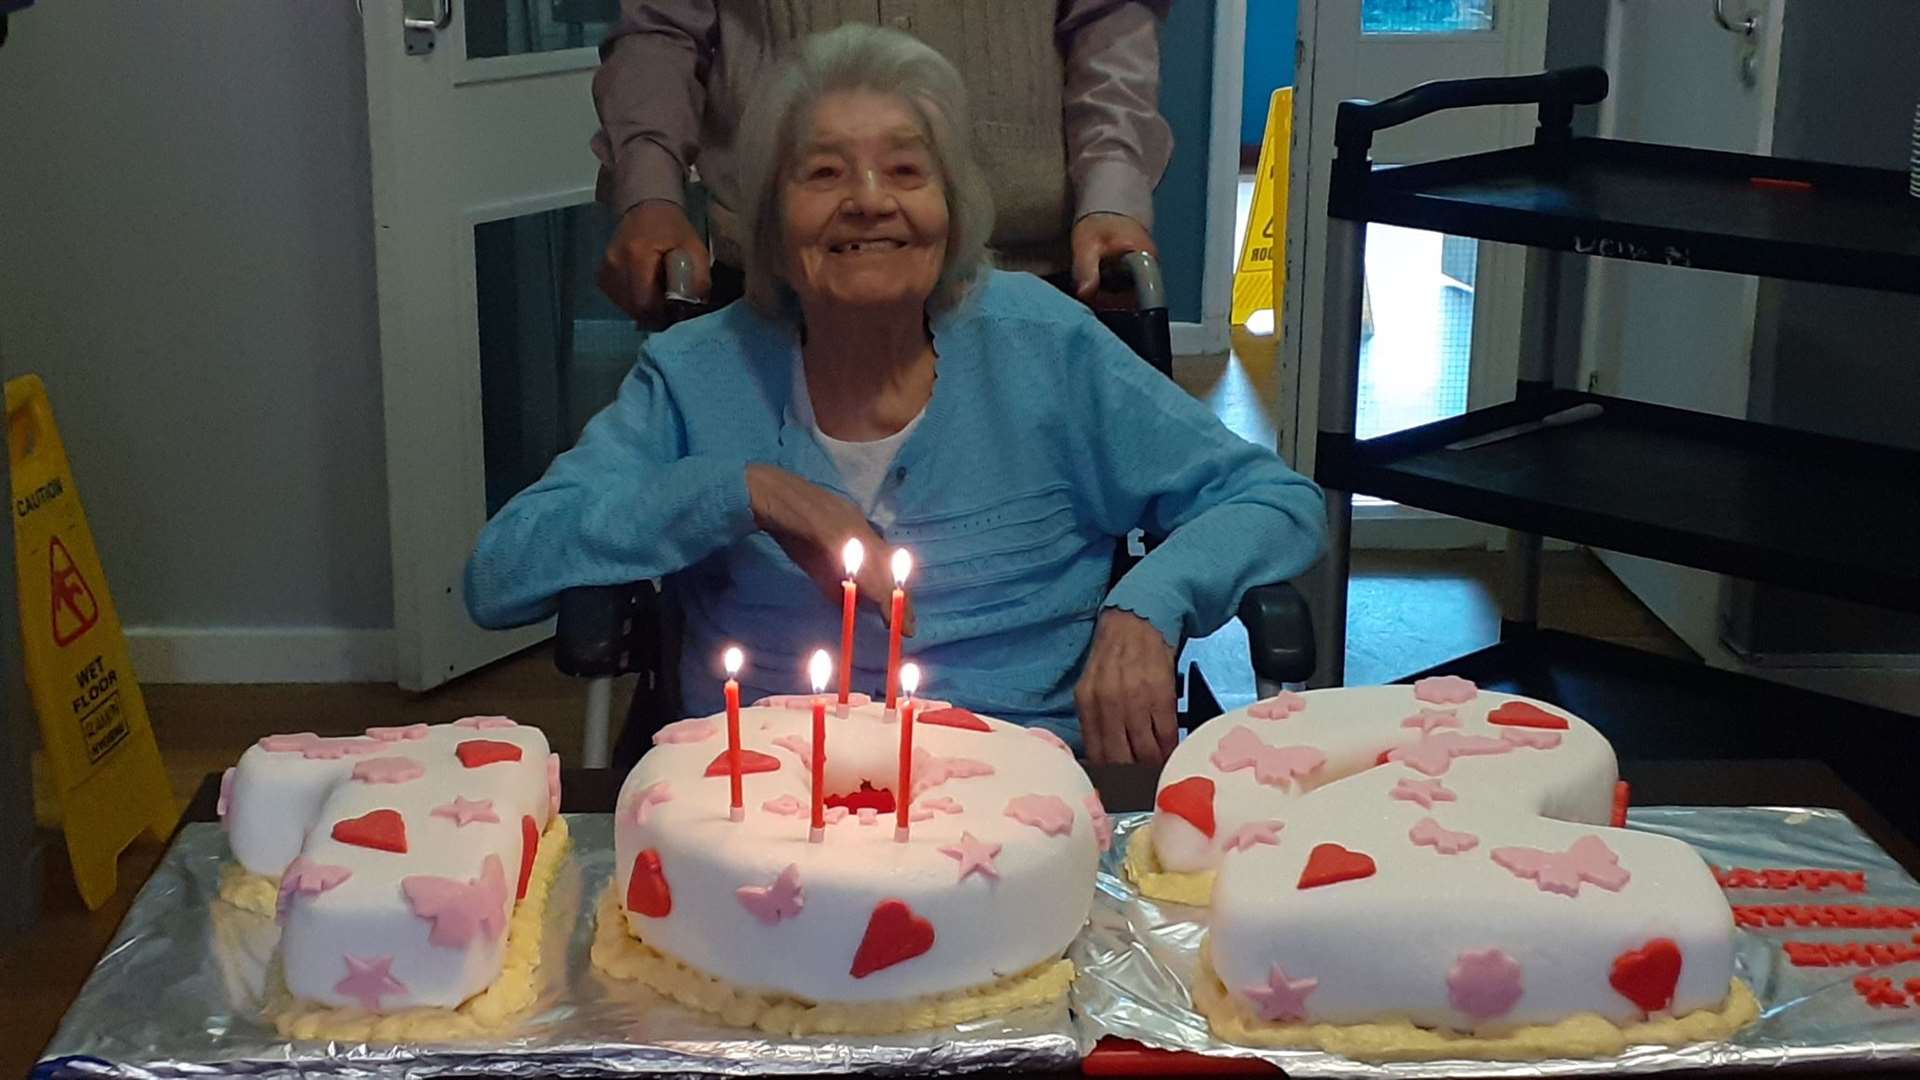 Staff at the Betsy Clara Nursing Home surprised Lorraine with a cake. Picture: Lorraine Milton